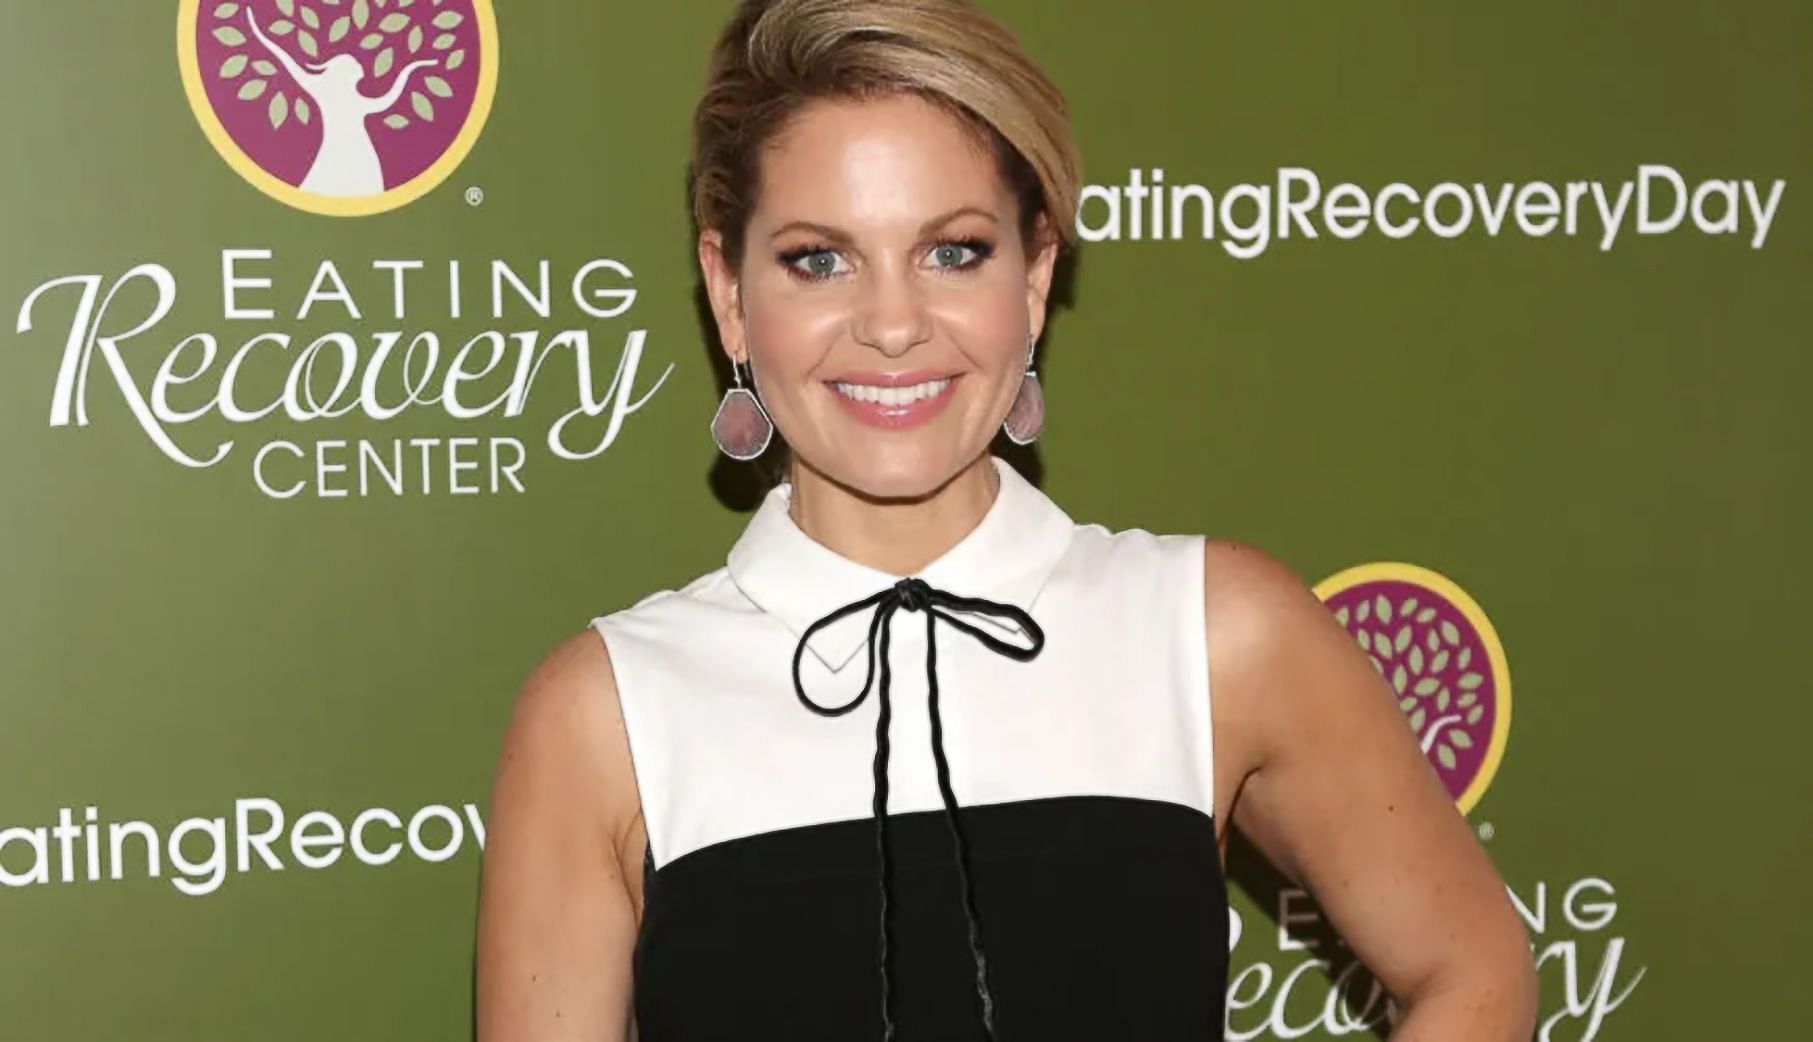 Candace Cameron Bure at Eating Recovery Center NYC (Image via Jerritt Clark)